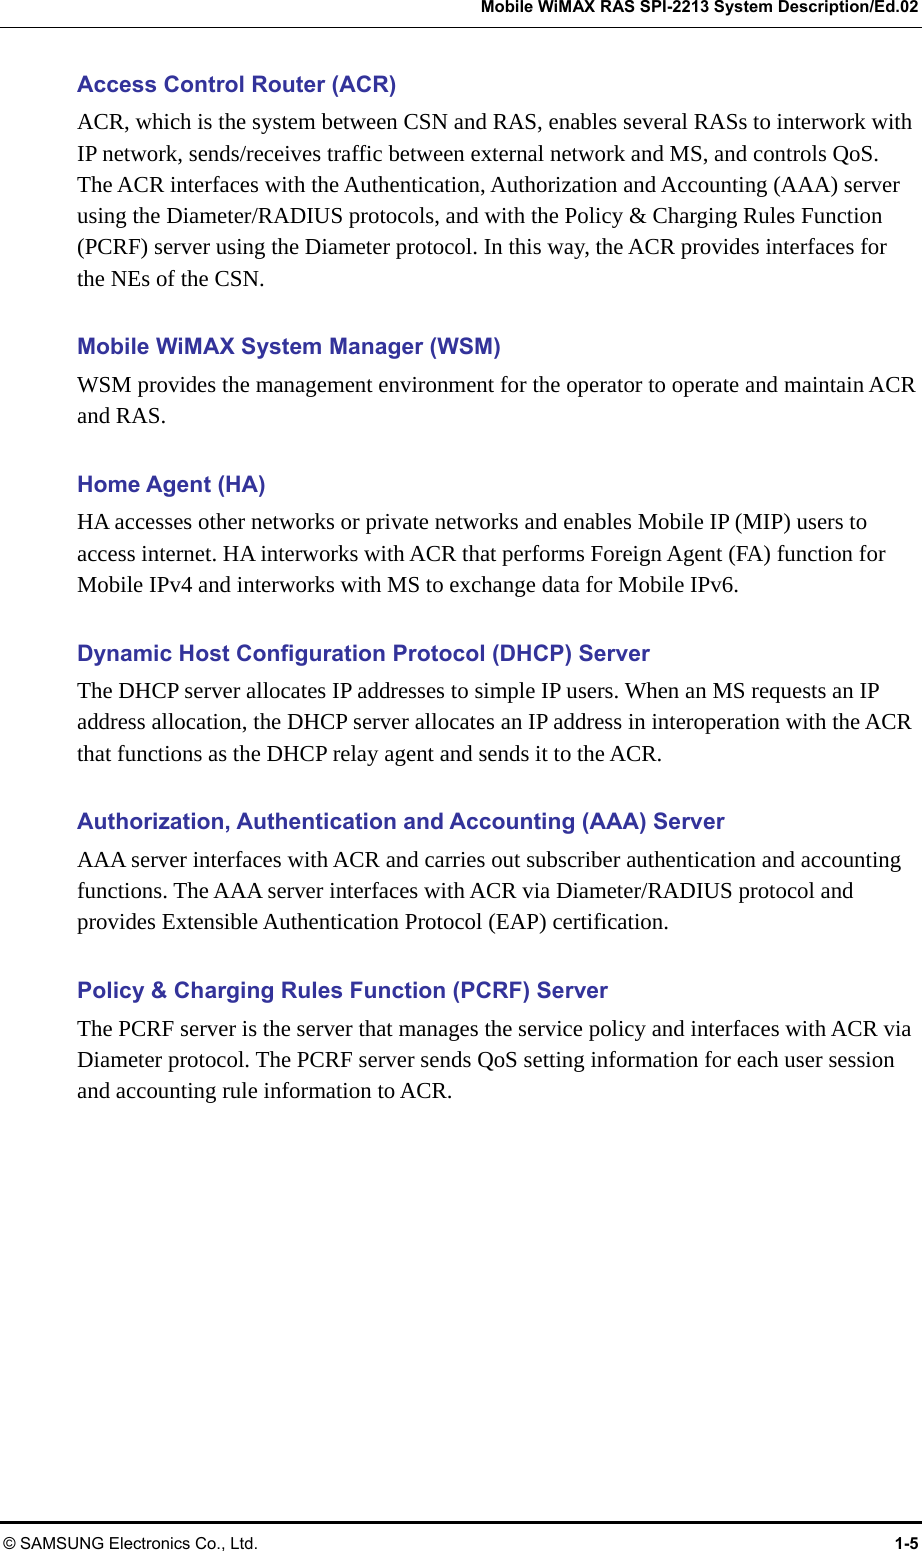   Mobile WiMAX RAS SPI-2213 System Description/Ed.02 © SAMSUNG Electronics Co., Ltd.  1-5 Access Control Router (ACR) ACR, which is the system between CSN and RAS, enables several RASs to interwork with IP network, sends/receives traffic between external network and MS, and controls QoS.   The ACR interfaces with the Authentication, Authorization and Accounting (AAA) server using the Diameter/RADIUS protocols, and with the Policy &amp; Charging Rules Function (PCRF) server using the Diameter protocol. In this way, the ACR provides interfaces for the NEs of the CSN.  Mobile WiMAX System Manager (WSM) WSM provides the management environment for the operator to operate and maintain ACR and RAS.  Home Agent (HA) HA accesses other networks or private networks and enables Mobile IP (MIP) users to access internet. HA interworks with ACR that performs Foreign Agent (FA) function for Mobile IPv4 and interworks with MS to exchange data for Mobile IPv6.  Dynamic Host Configuration Protocol (DHCP) Server The DHCP server allocates IP addresses to simple IP users. When an MS requests an IP address allocation, the DHCP server allocates an IP address in interoperation with the ACR that functions as the DHCP relay agent and sends it to the ACR.  Authorization, Authentication and Accounting (AAA) Server   AAA server interfaces with ACR and carries out subscriber authentication and accounting functions. The AAA server interfaces with ACR via Diameter/RADIUS protocol and provides Extensible Authentication Protocol (EAP) certification.  Policy &amp; Charging Rules Function (PCRF) Server The PCRF server is the server that manages the service policy and interfaces with ACR via Diameter protocol. The PCRF server sends QoS setting information for each user session and accounting rule information to ACR.  